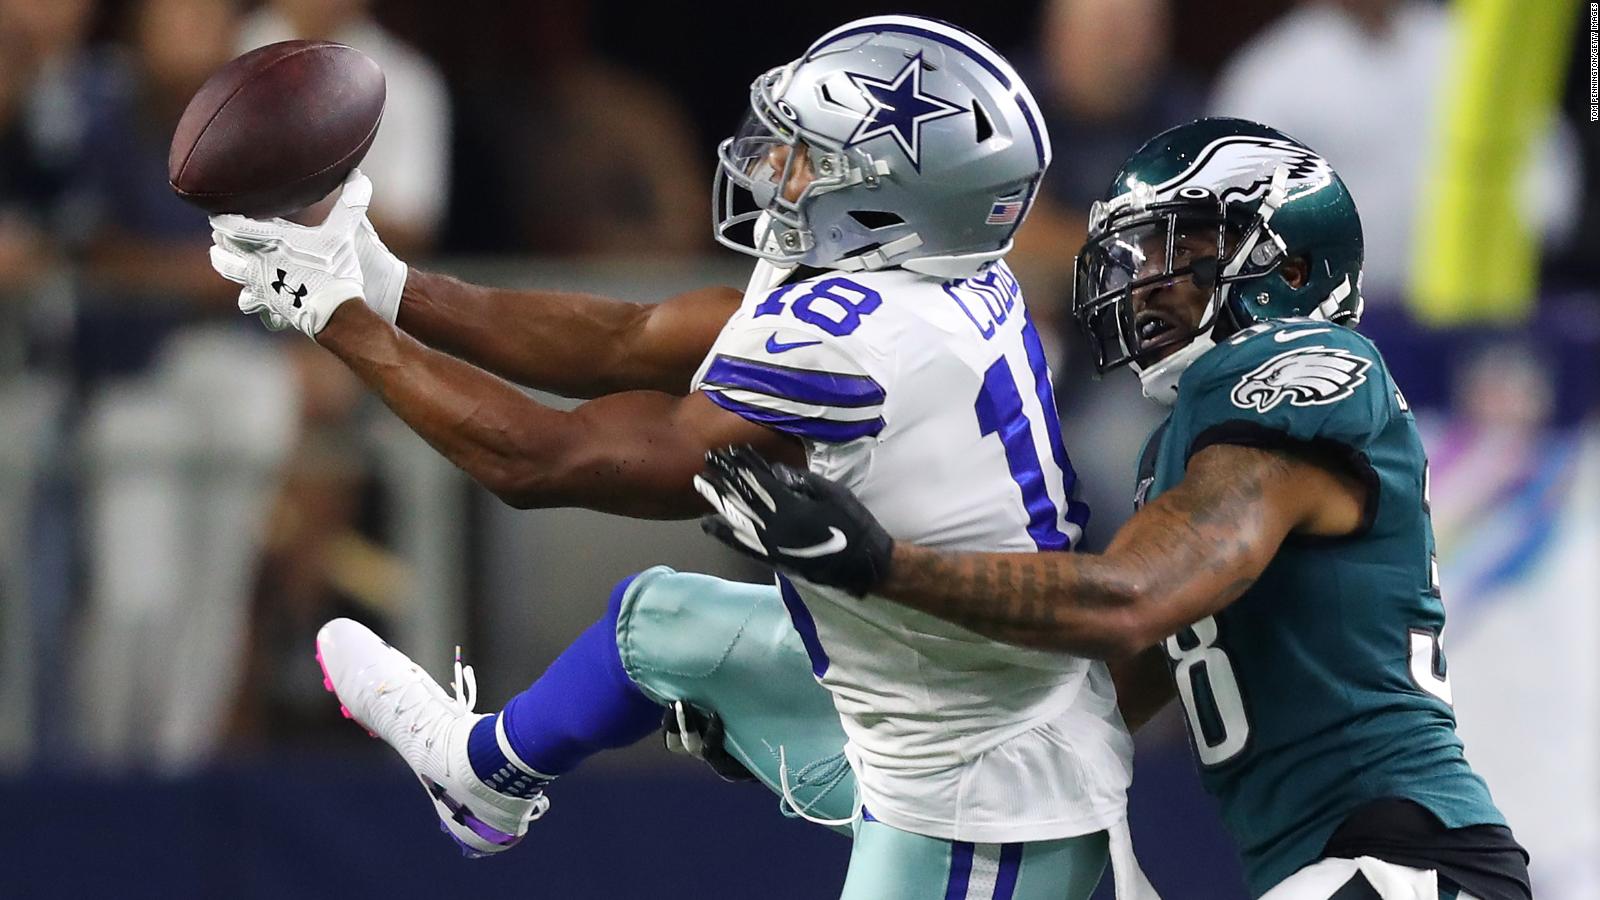 Cowboys vs. Eagles: The bitter rivals square off for a chance at the playoffs - CNN